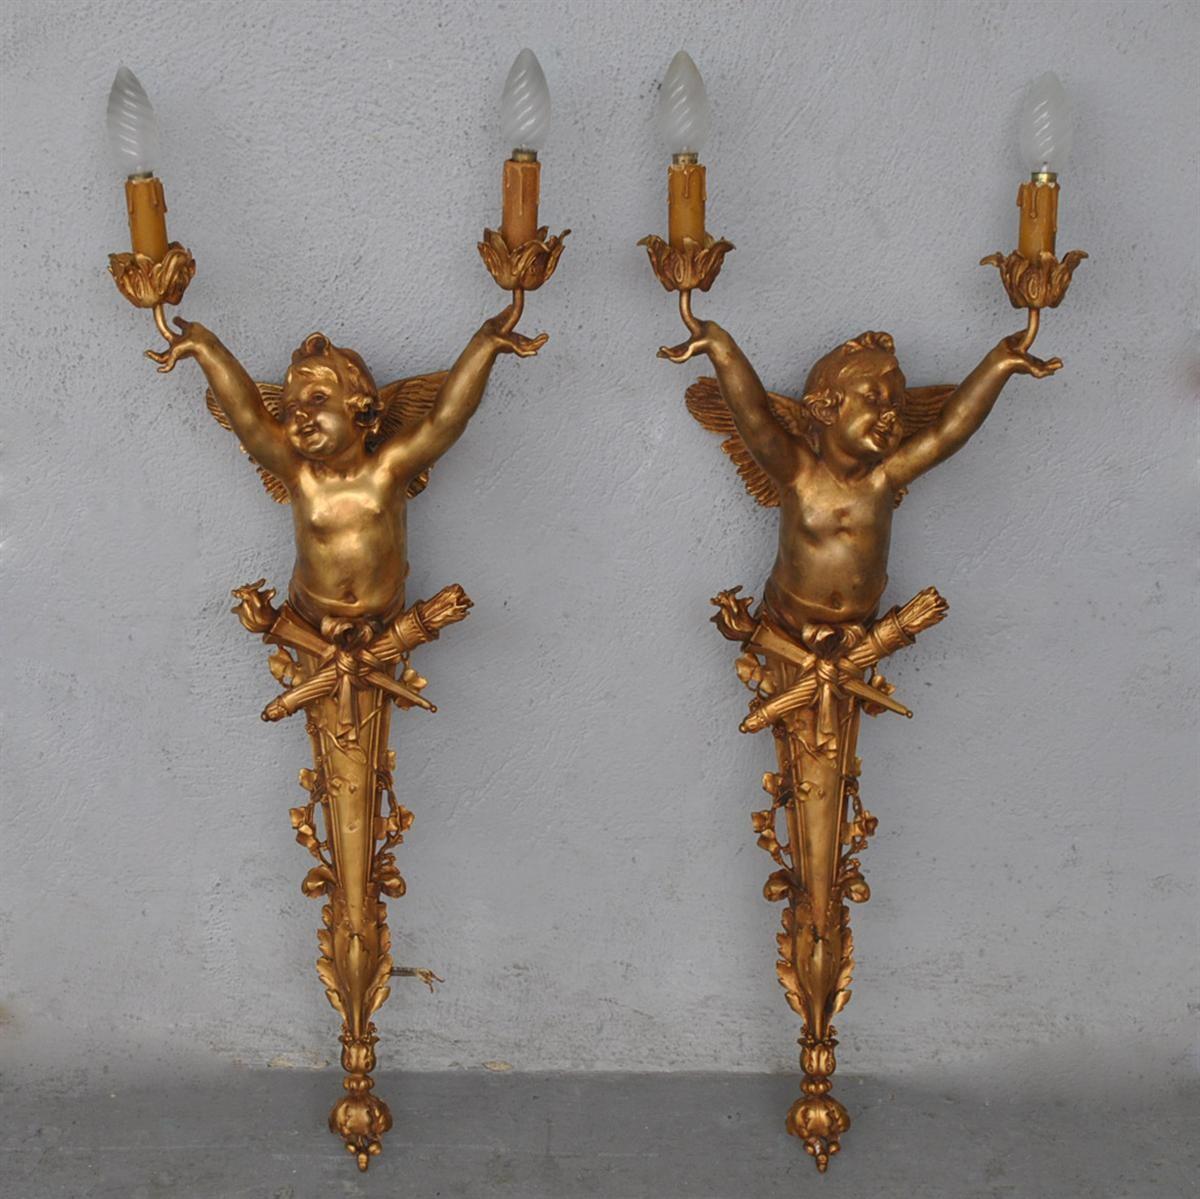 Pair of large Art Nouveau sconces with two branches of light, in gilded bronze. In the shape of a putto with quiver, torch and foliage. Signed 